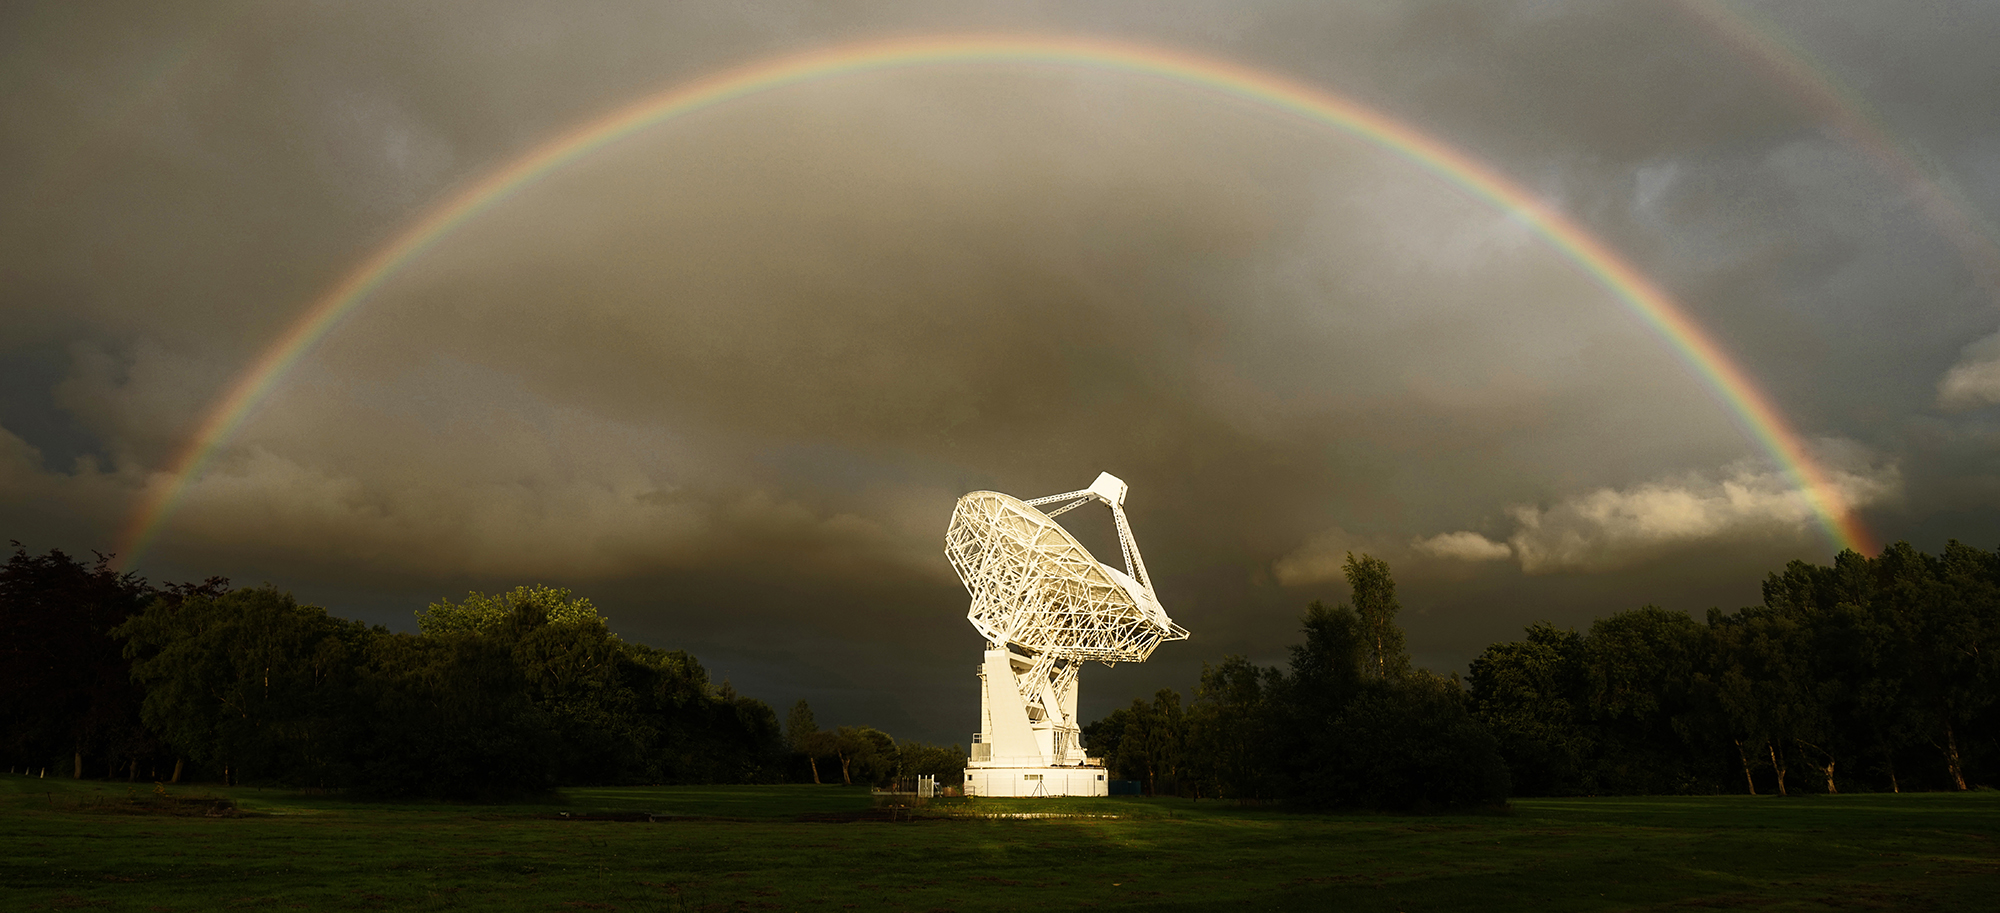 The Mark II Telescope at Jodrell Bank photographed against a moody sky encircled by a rainbow